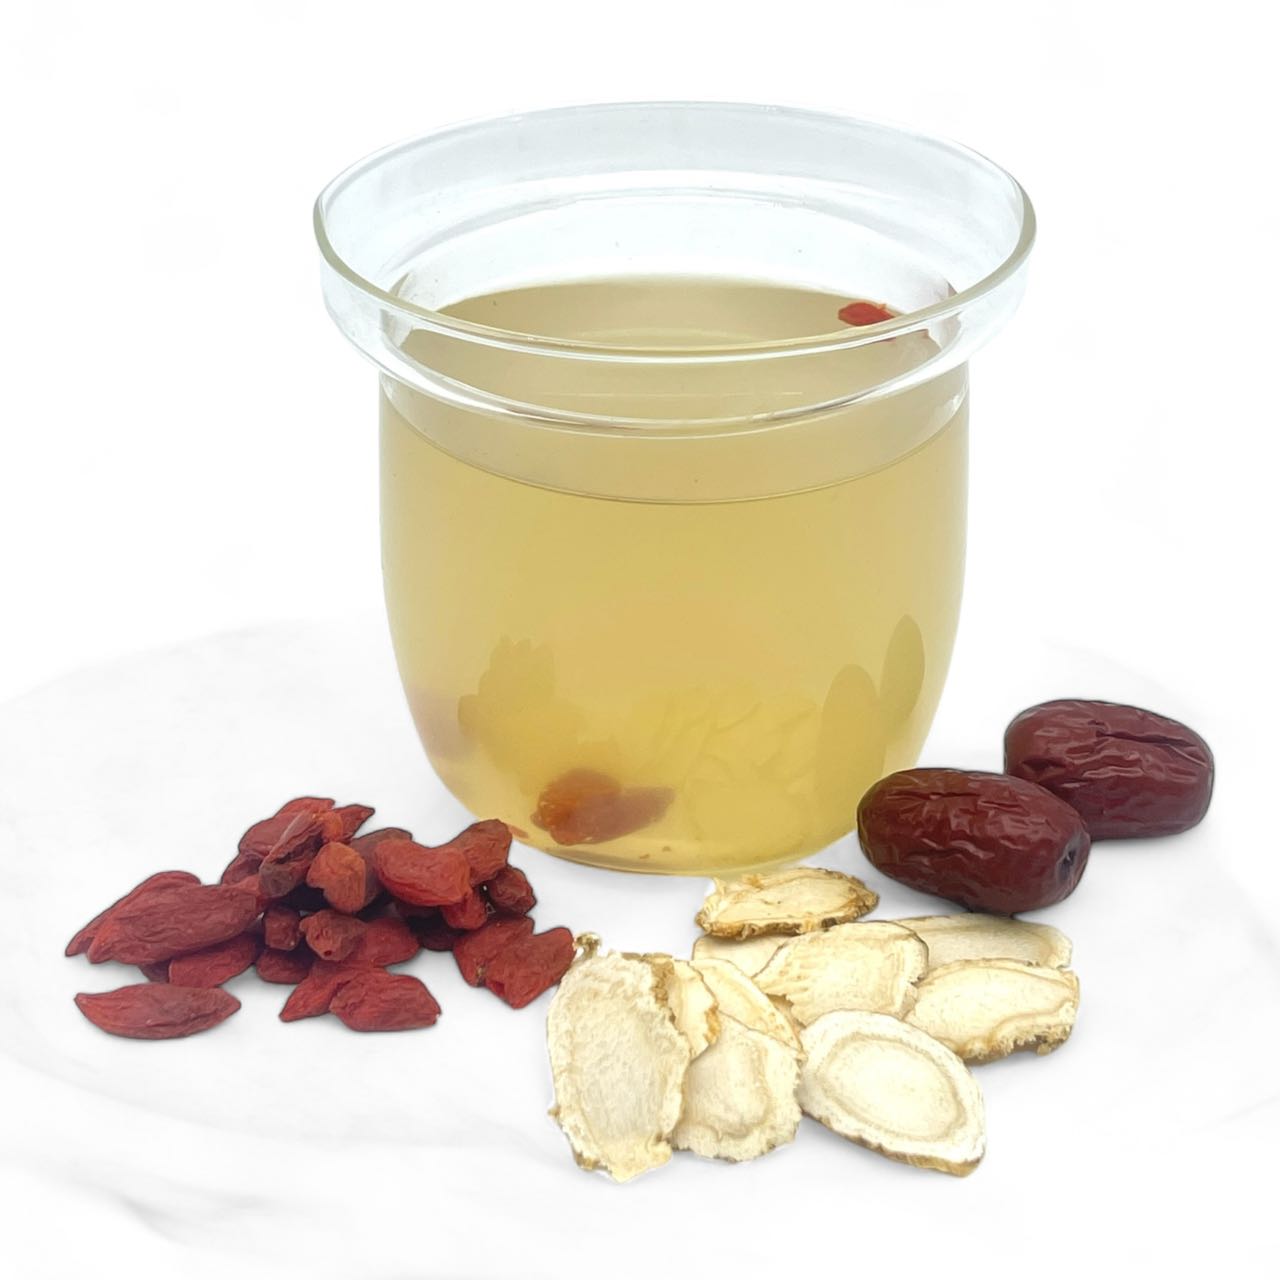 American Ginseng, Red Date, and Goji Berry Tea